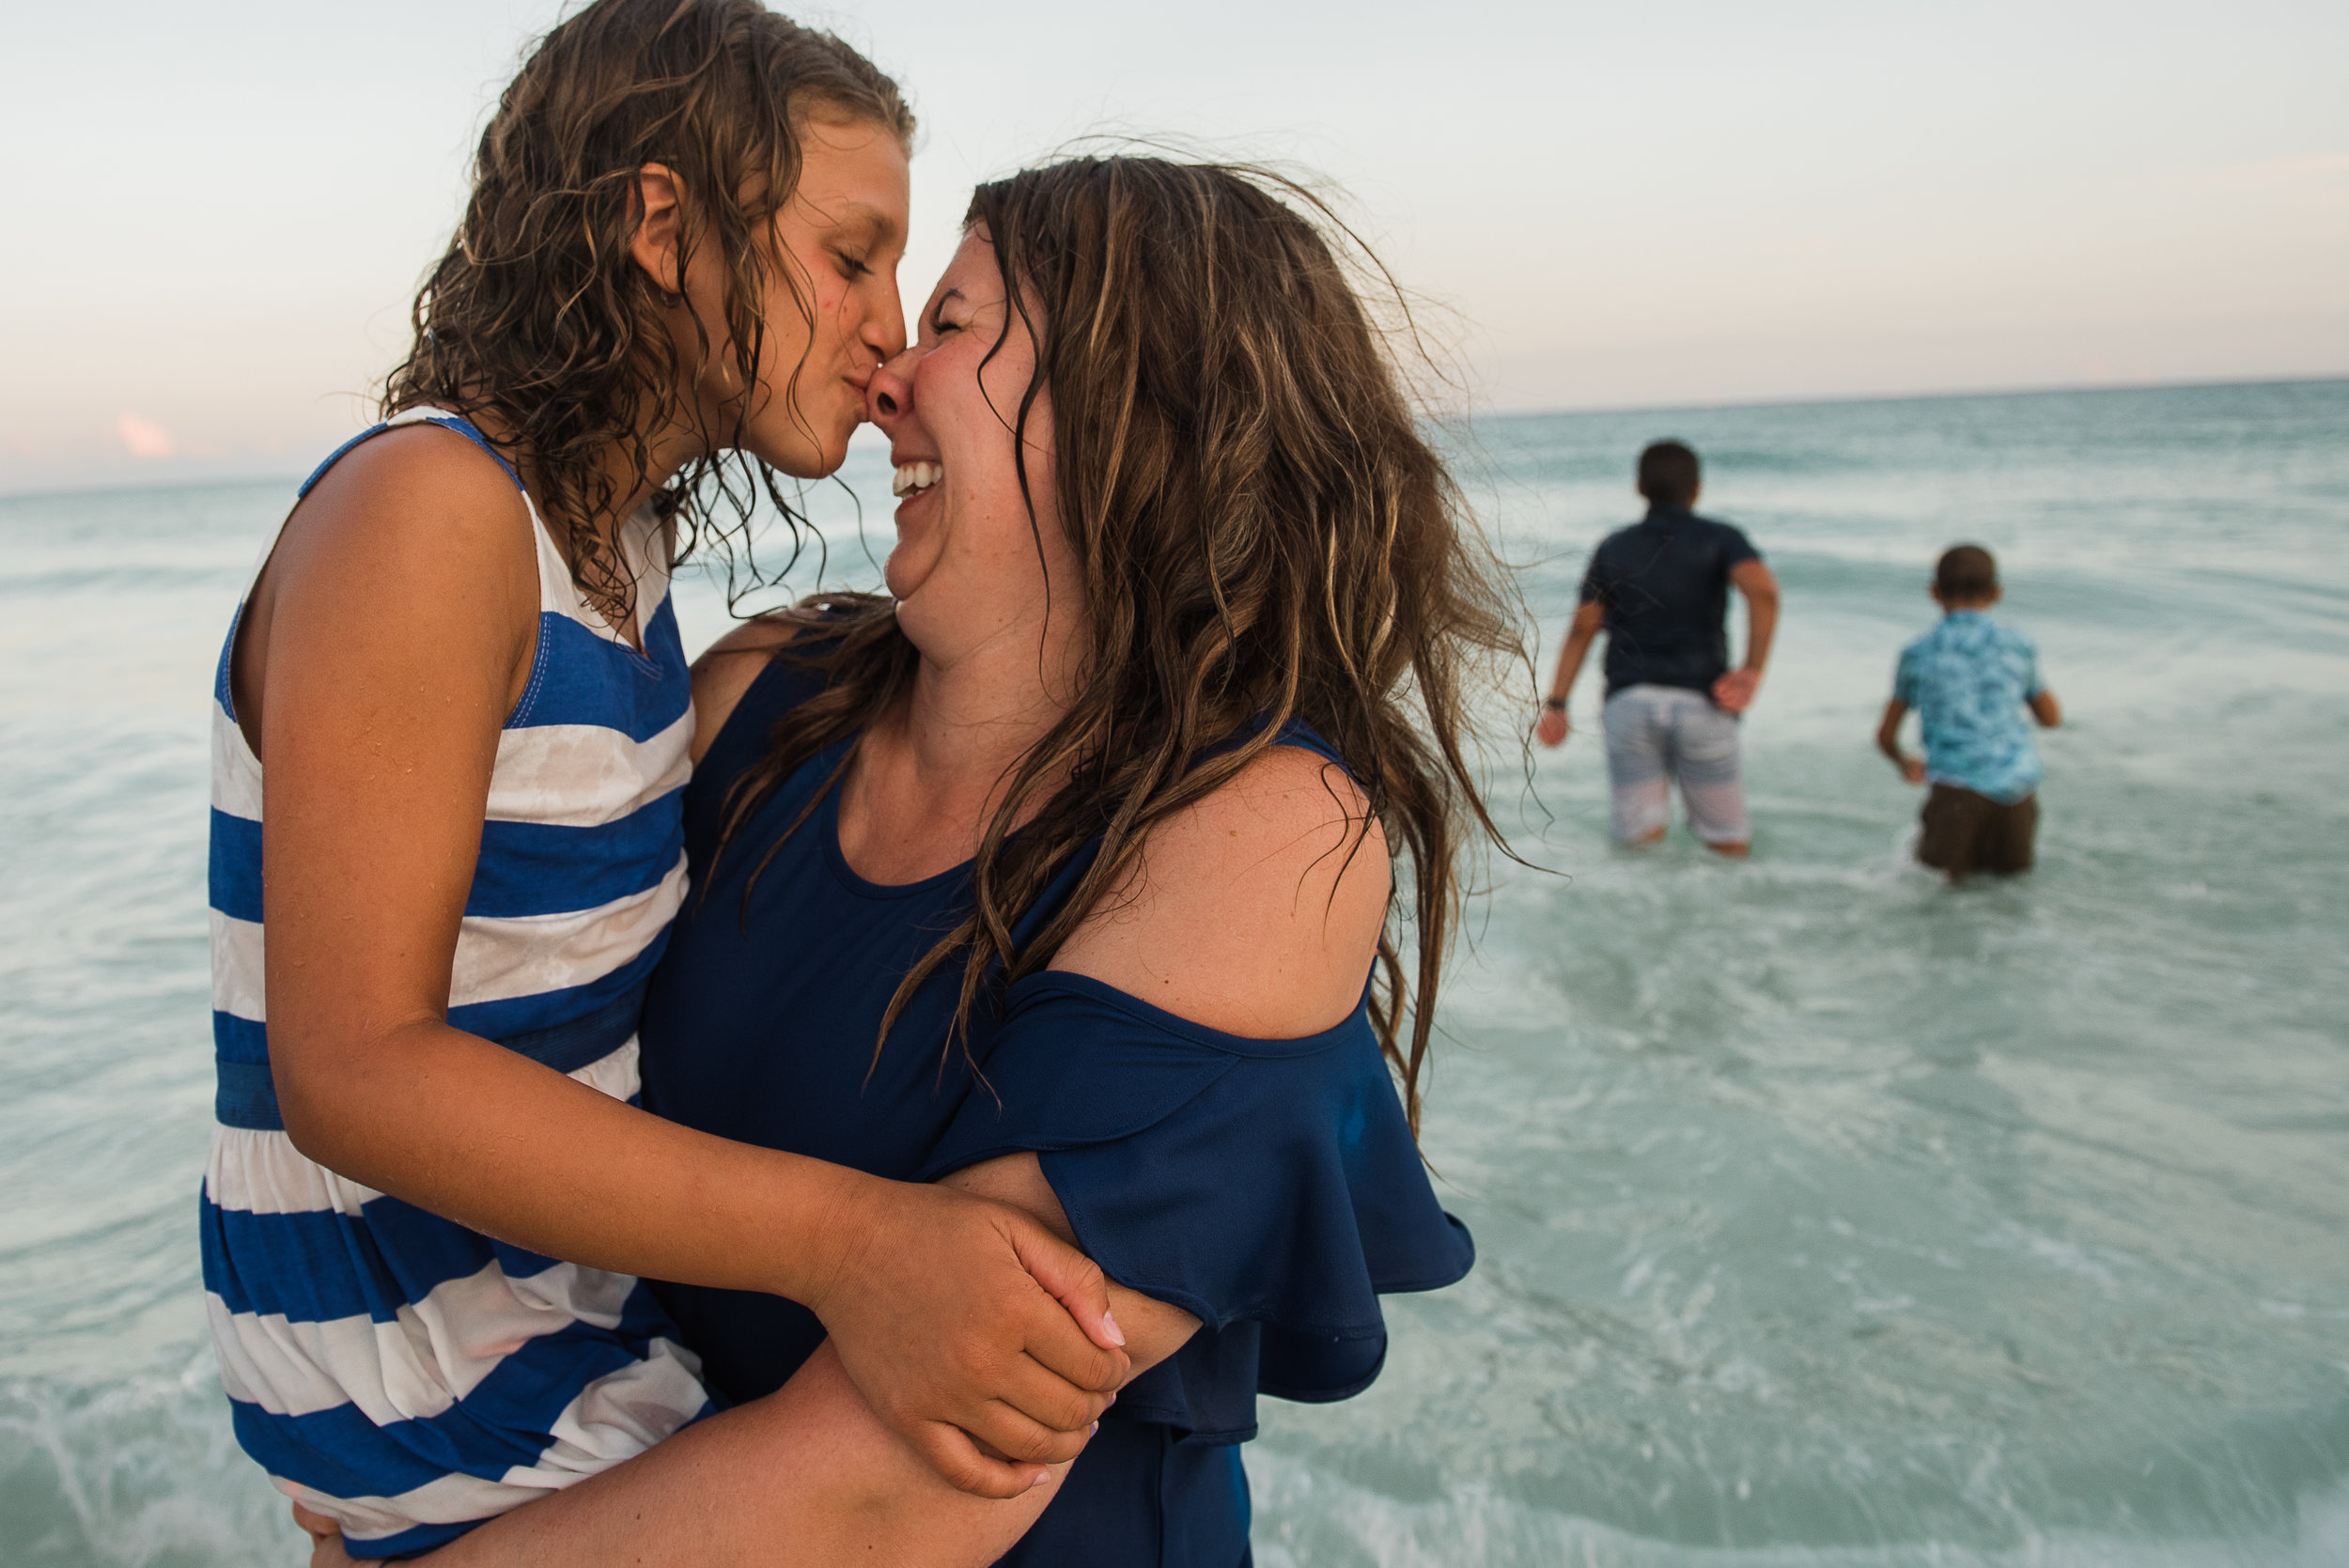 annmangumphotography.jpg-pensacola family photographer-mom and daughter in water